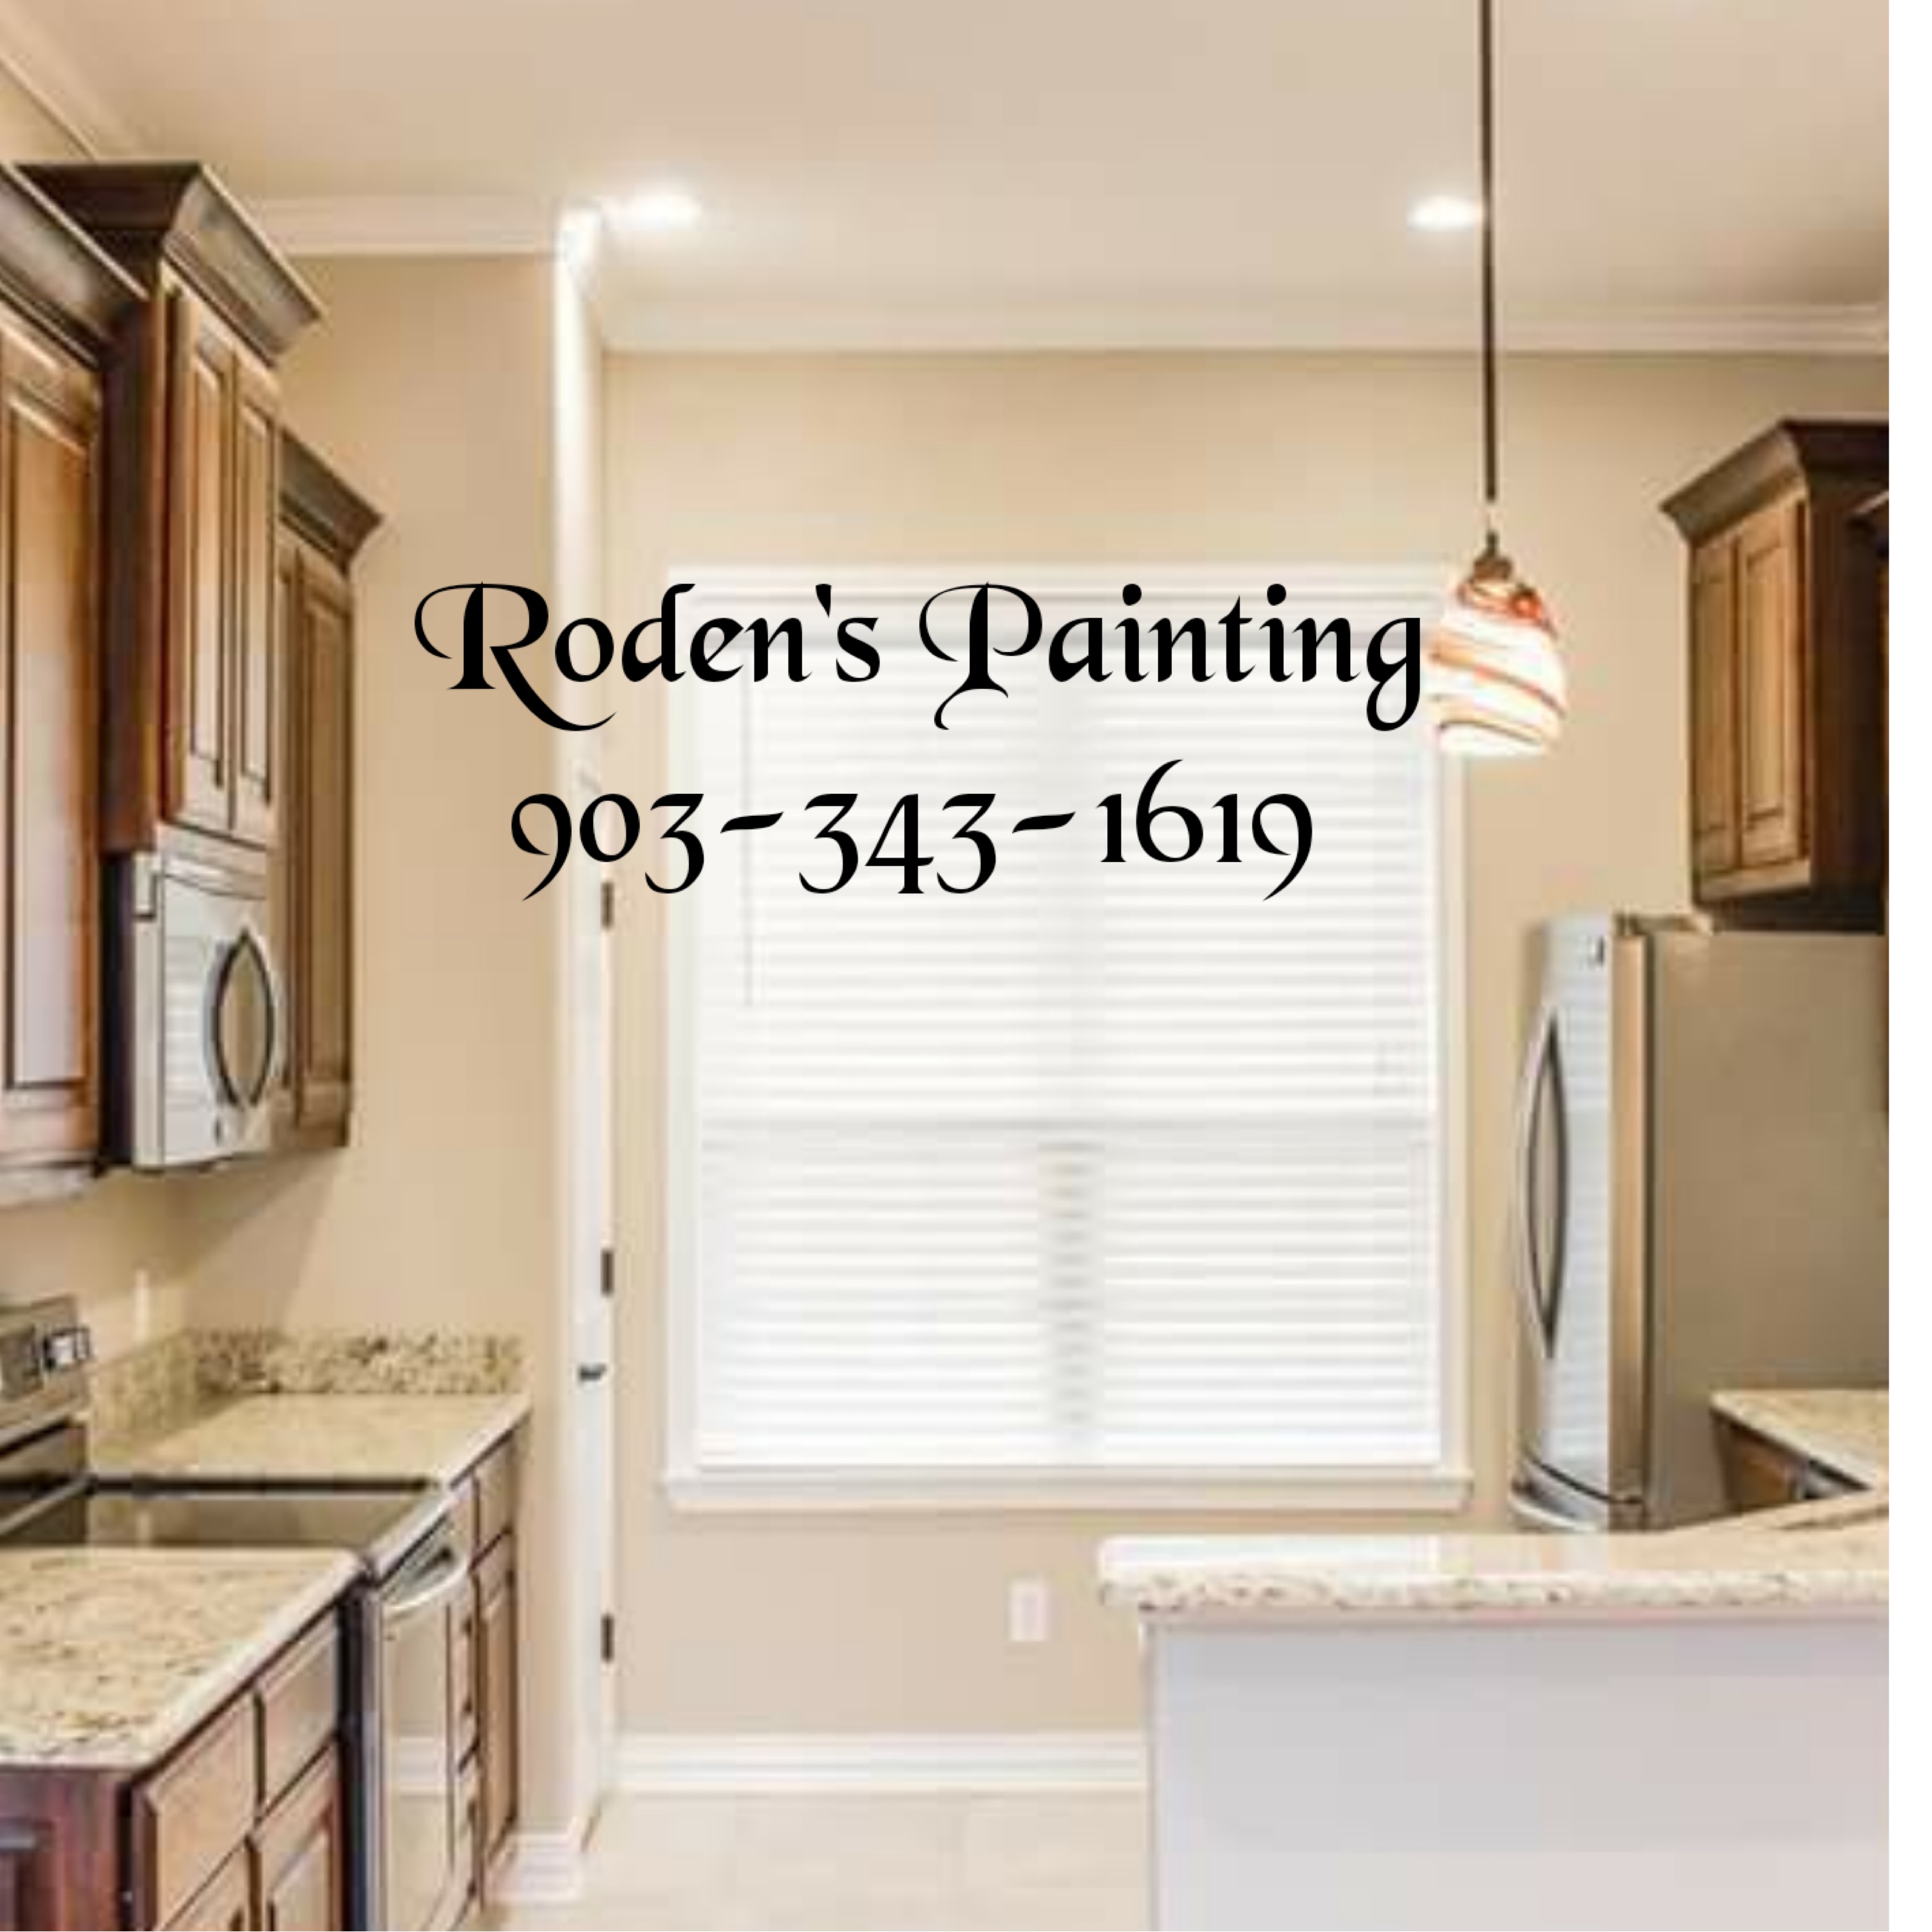 Roden's Painting Logo